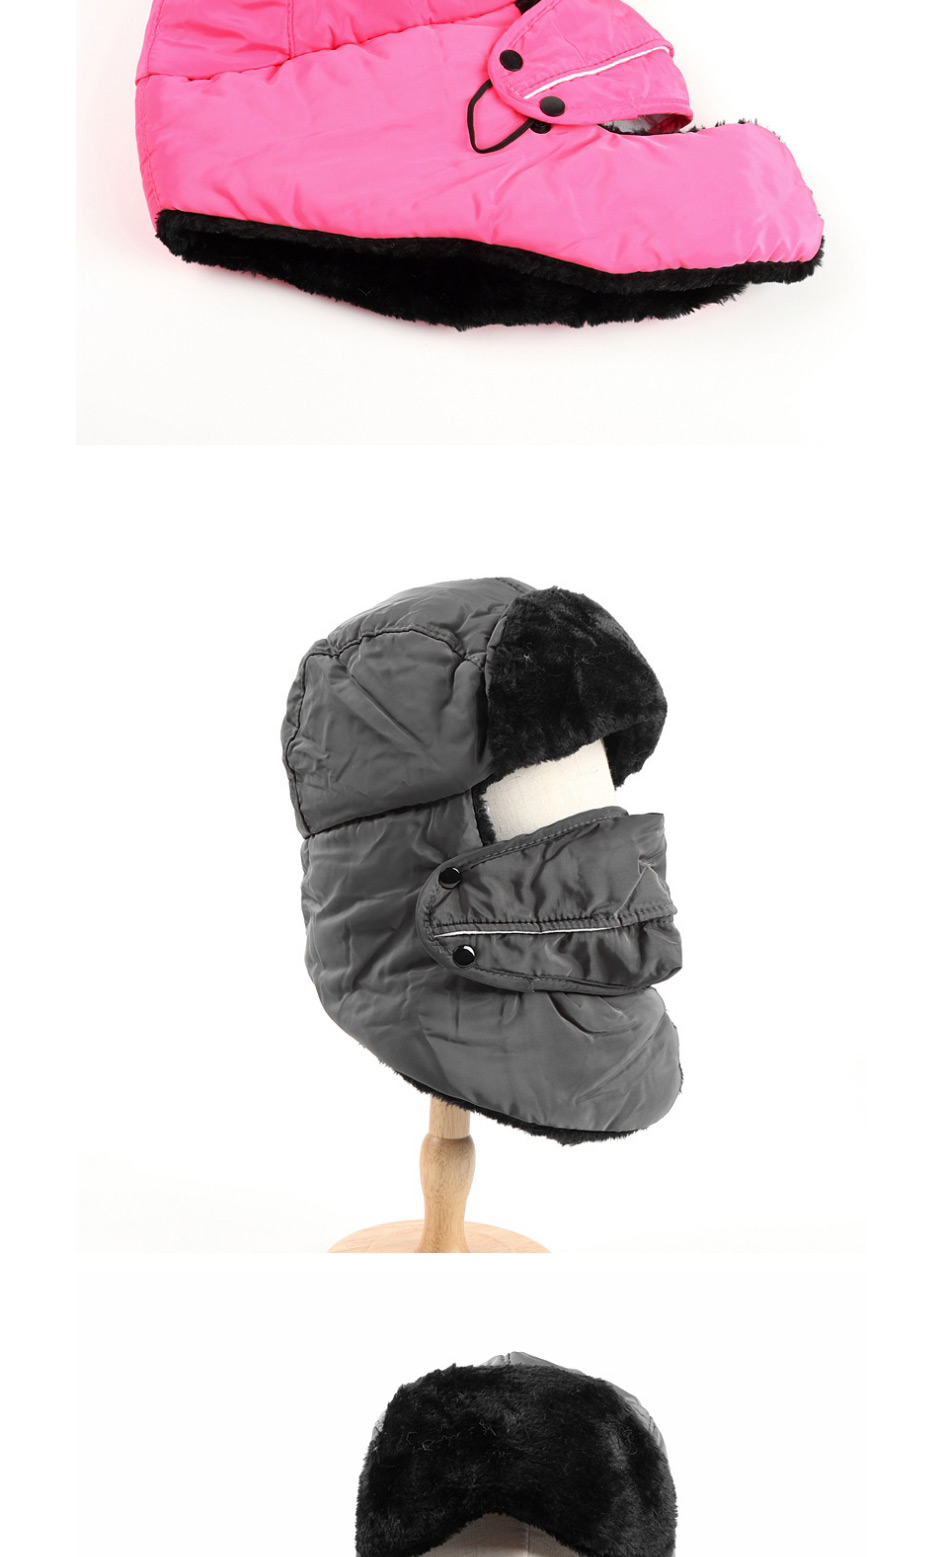 Fashion Navy Plus Velvet Warm Ear Protection Stitching Windproof Hood Neck Cap,Beanies&Others